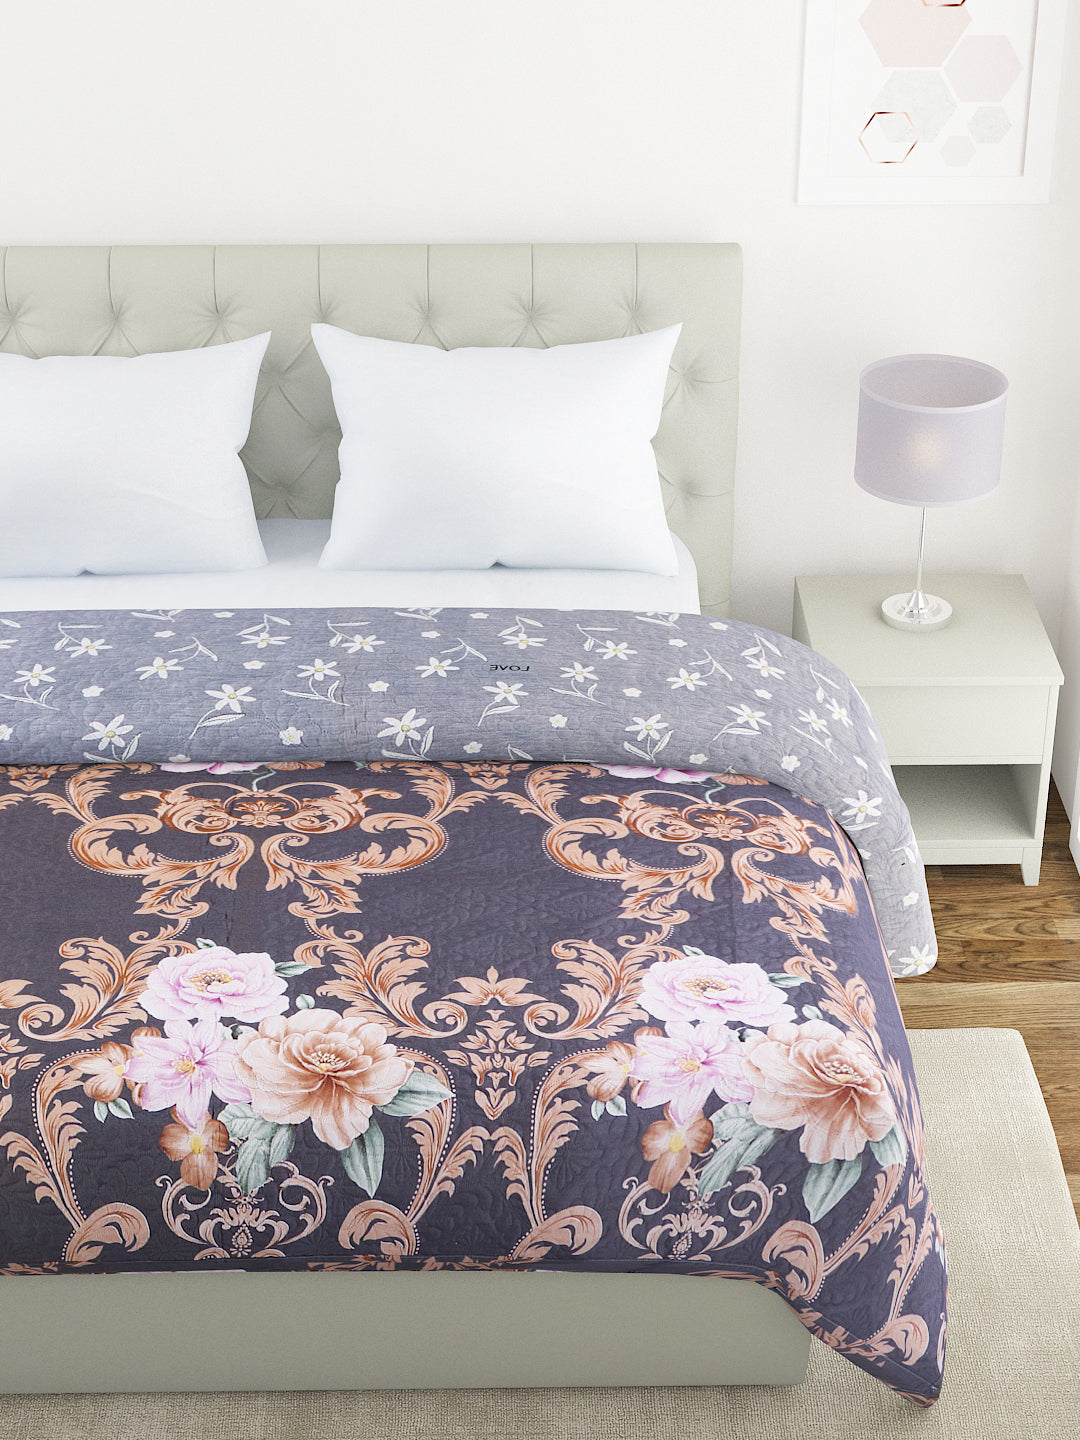 Floral Print Double Bed Light Weight Comforter-Grey and Brown